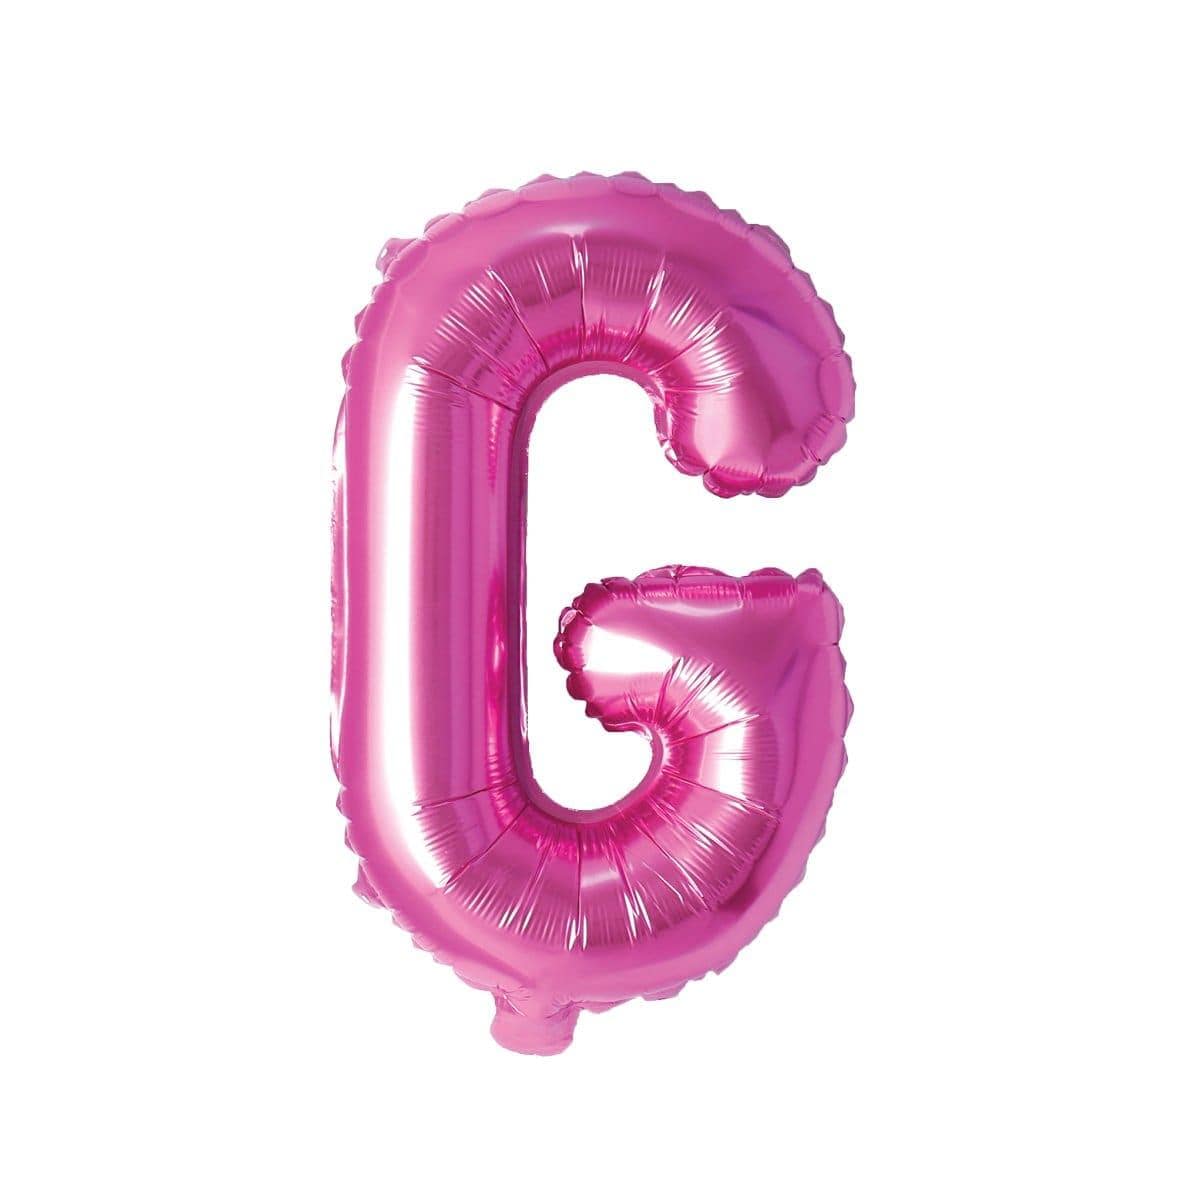 Buy Balloons Pink Letter G Foil Balloon, 16 Inches sold at Party Expert